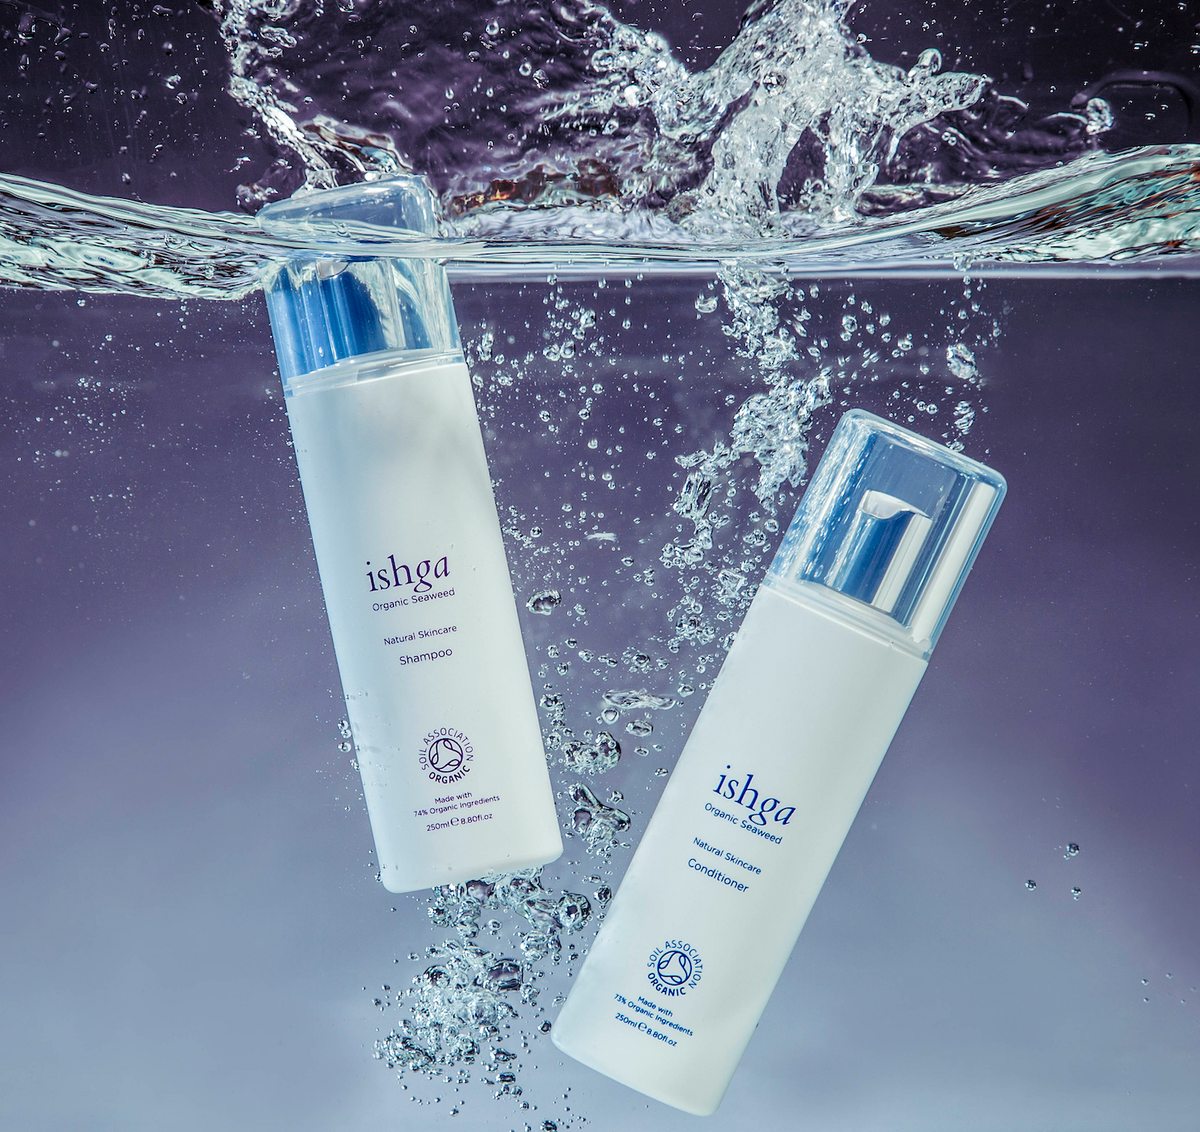 A bottle of ishga Organic Seaweed Shampoo and Conditioner in water